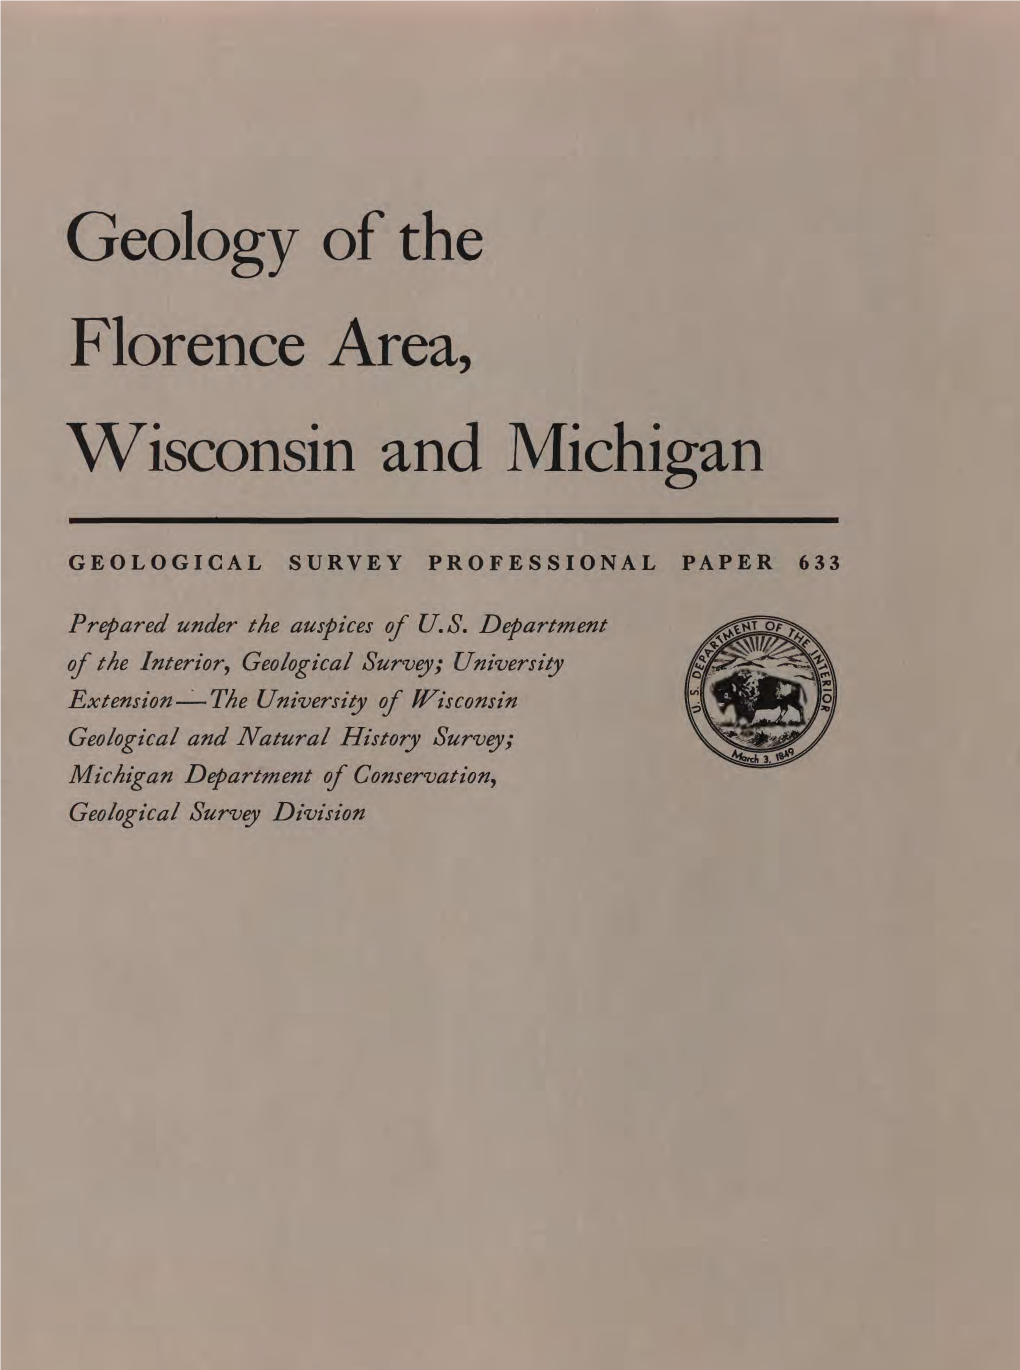 Geology of the Florence Area, Wisconsin and Michigan